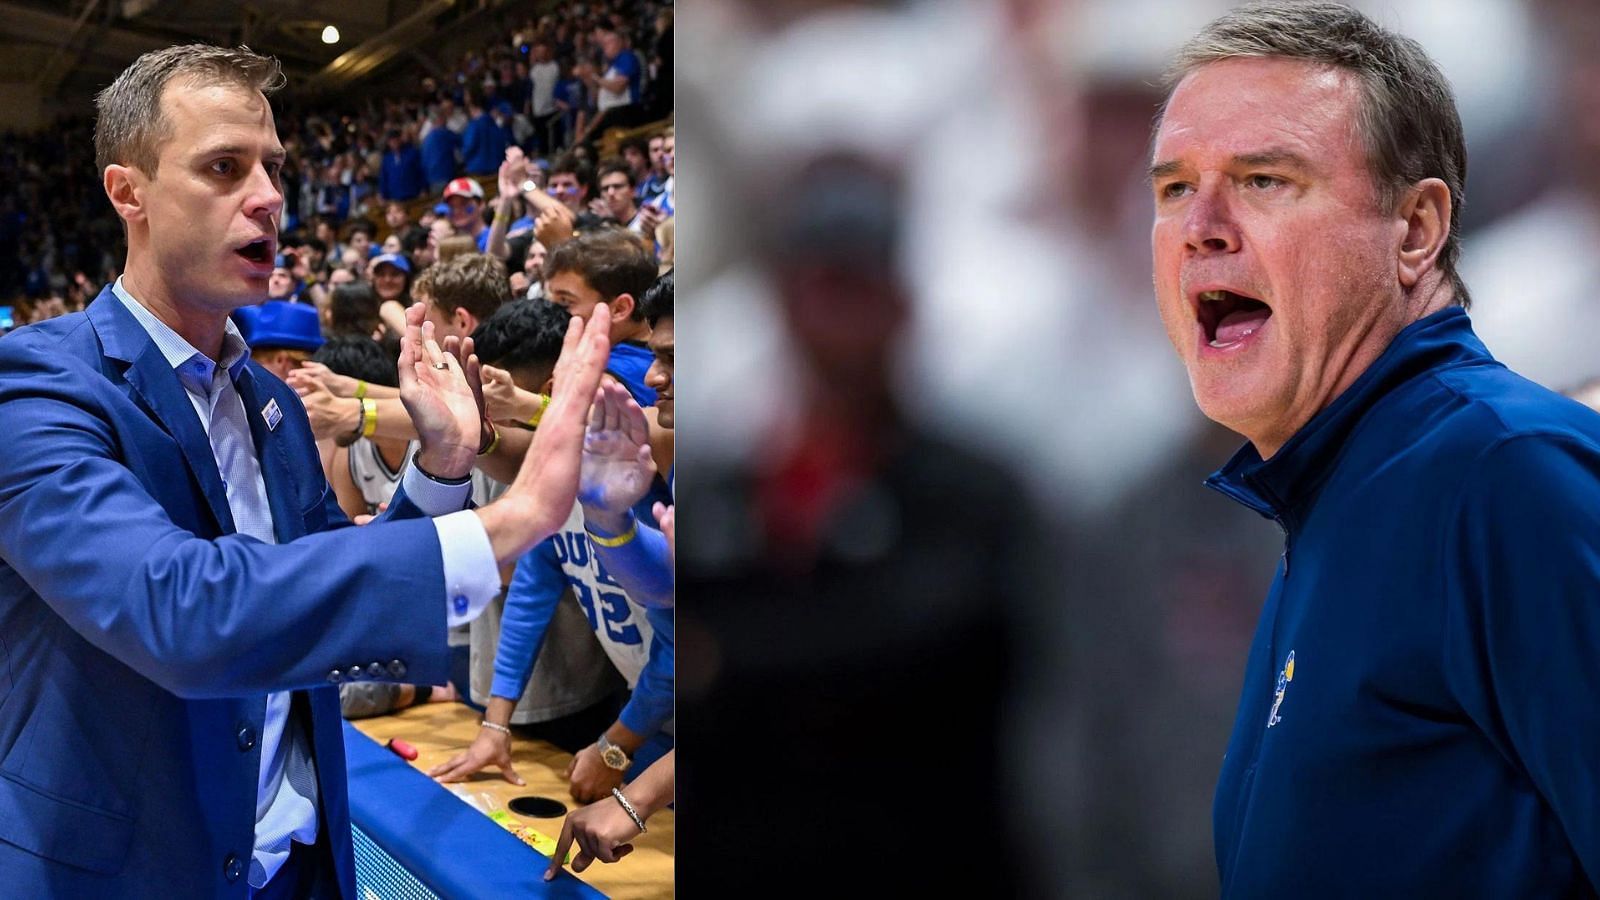 Duke and Kansas have both benefitted from questionable calls this season.